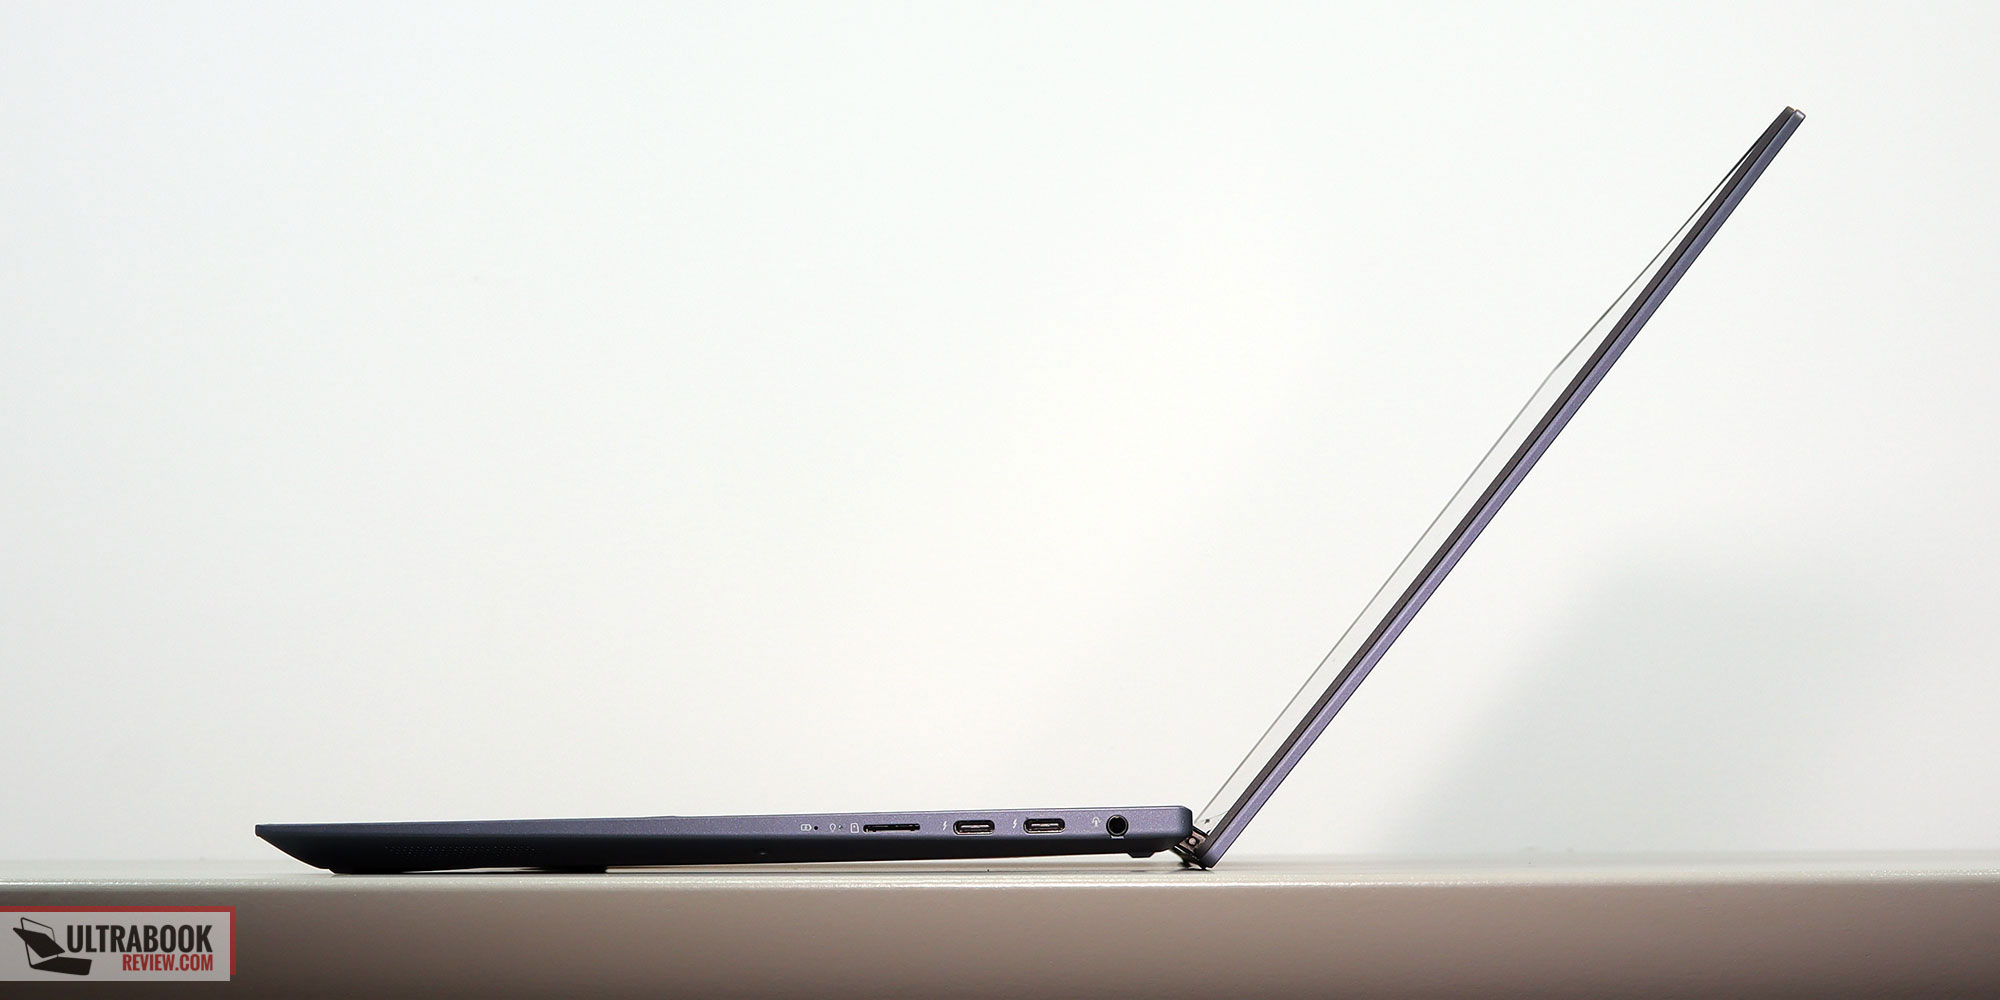 Asus ZenBook Flip 13 review: A beautiful OLED laptop with one thing missing